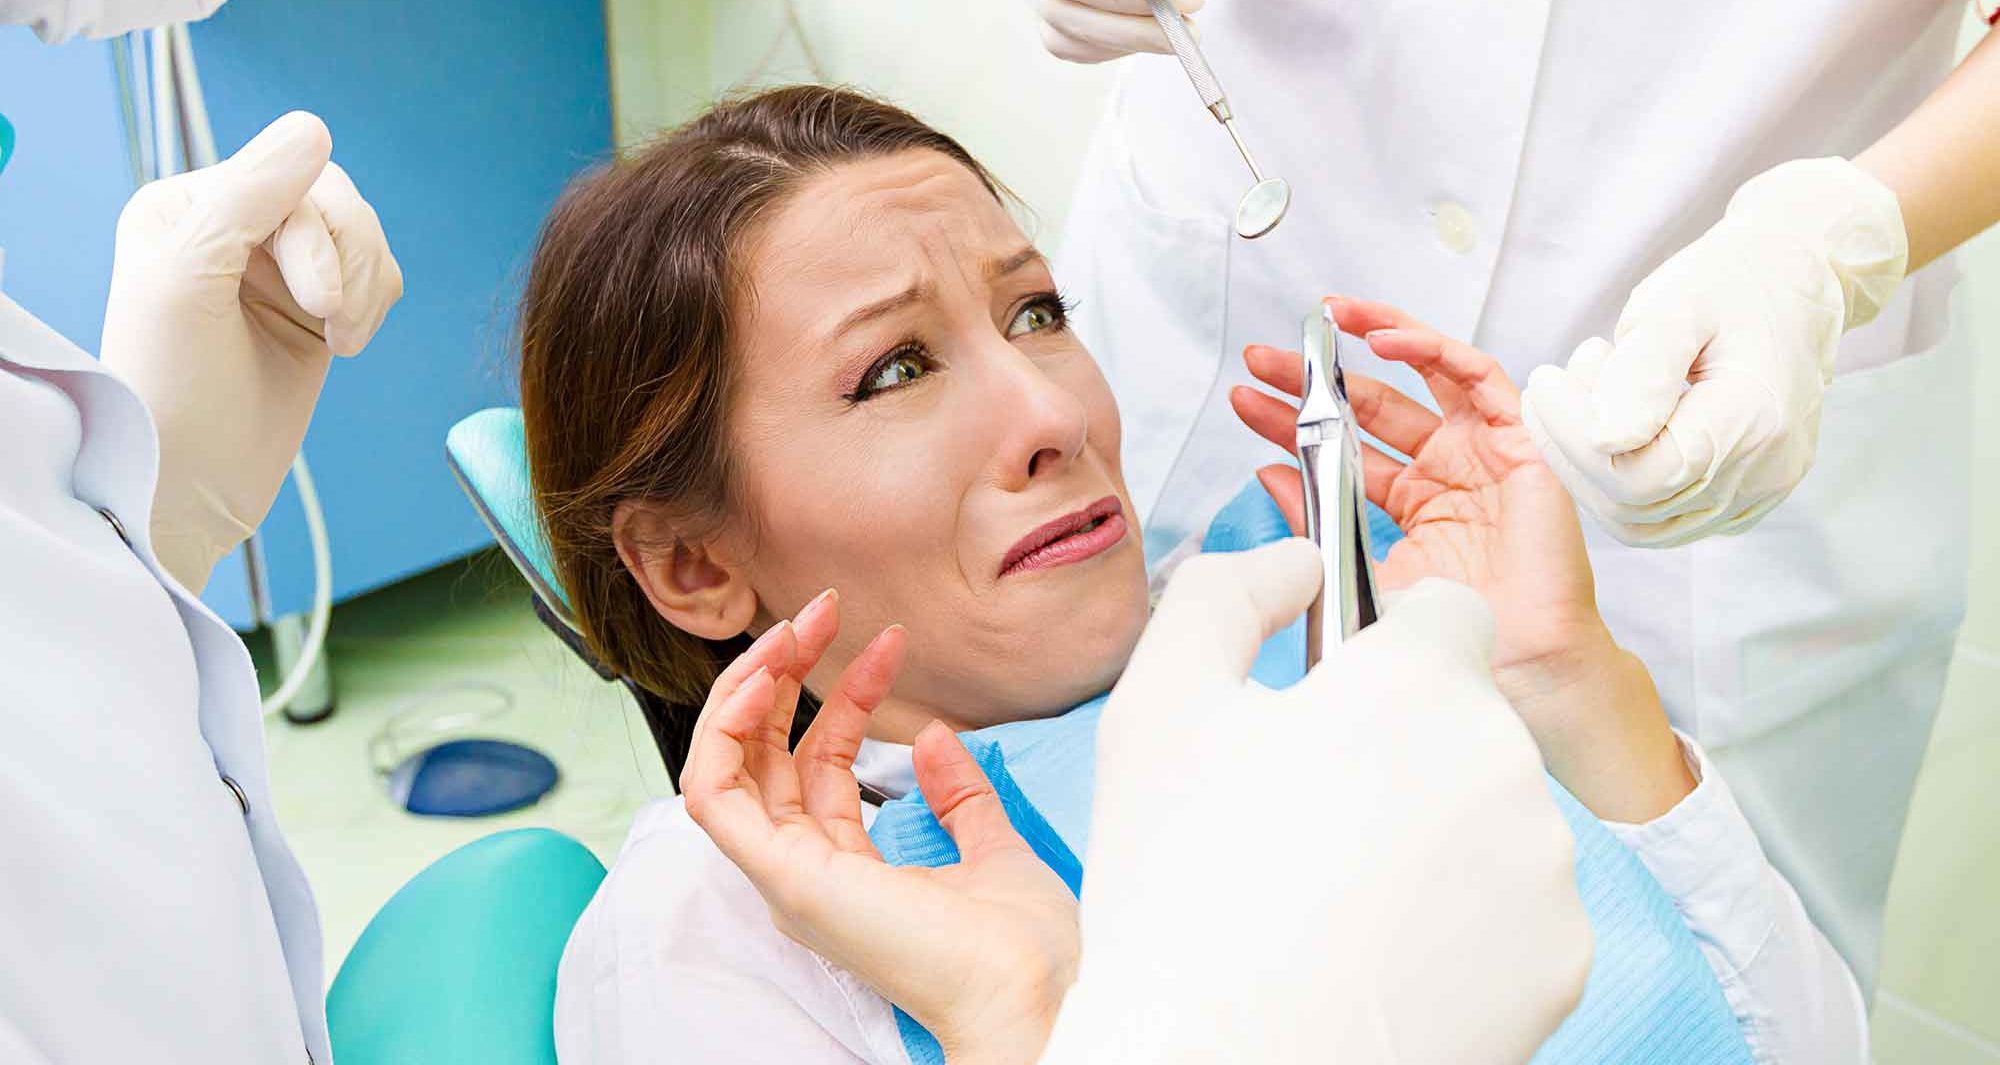 Overtreatment of dental procedures is unethical and is frustrating and upsetting to patients.